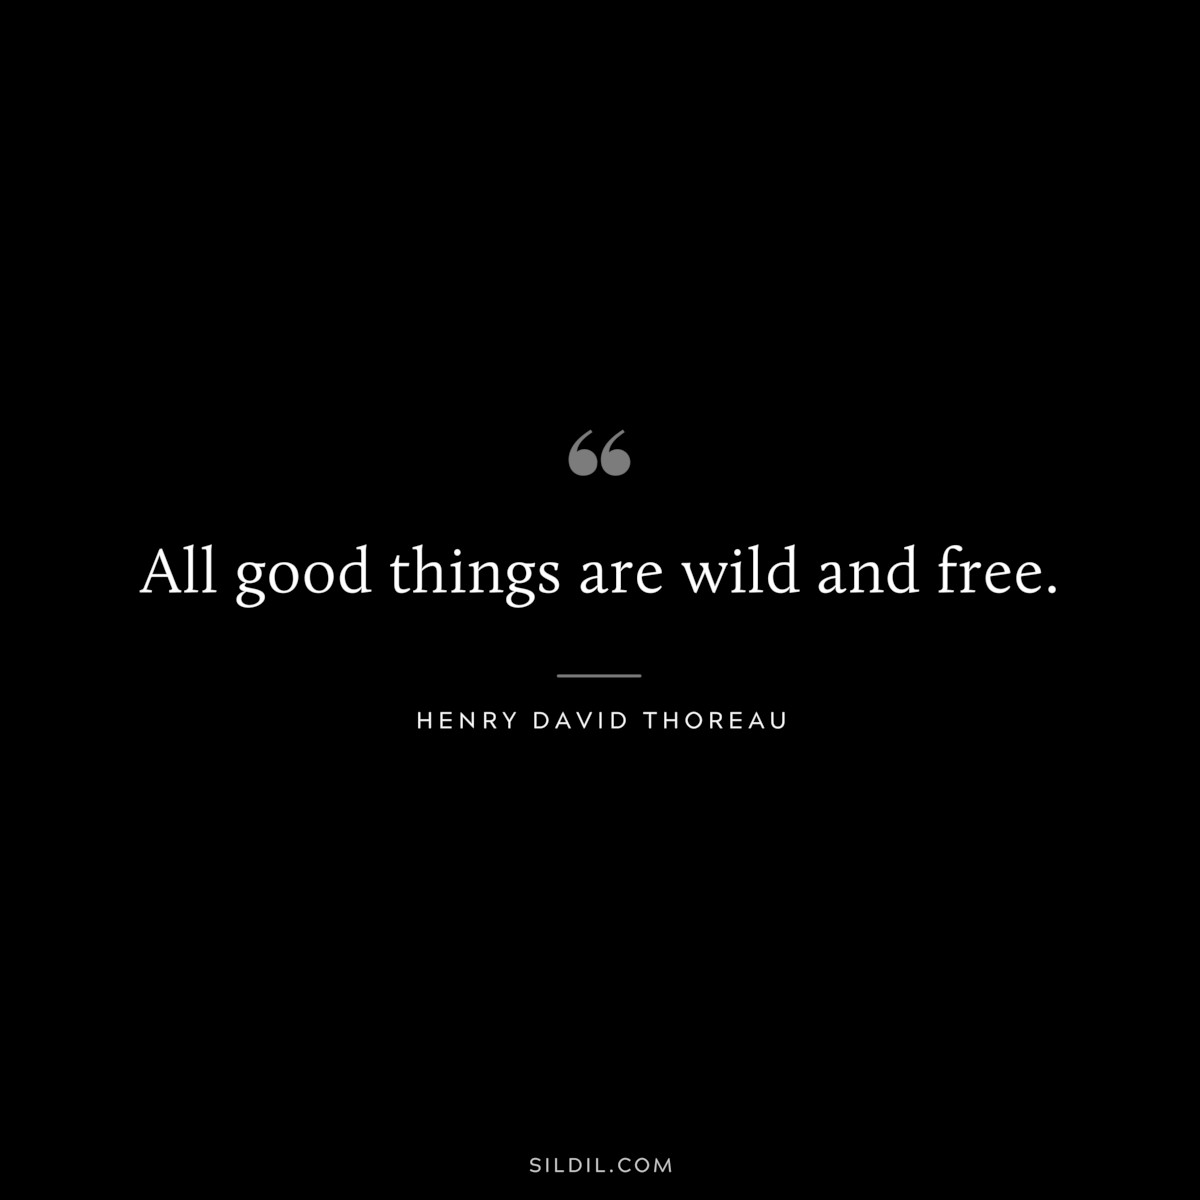 All good things are wild and free. — Henry David Thoreau